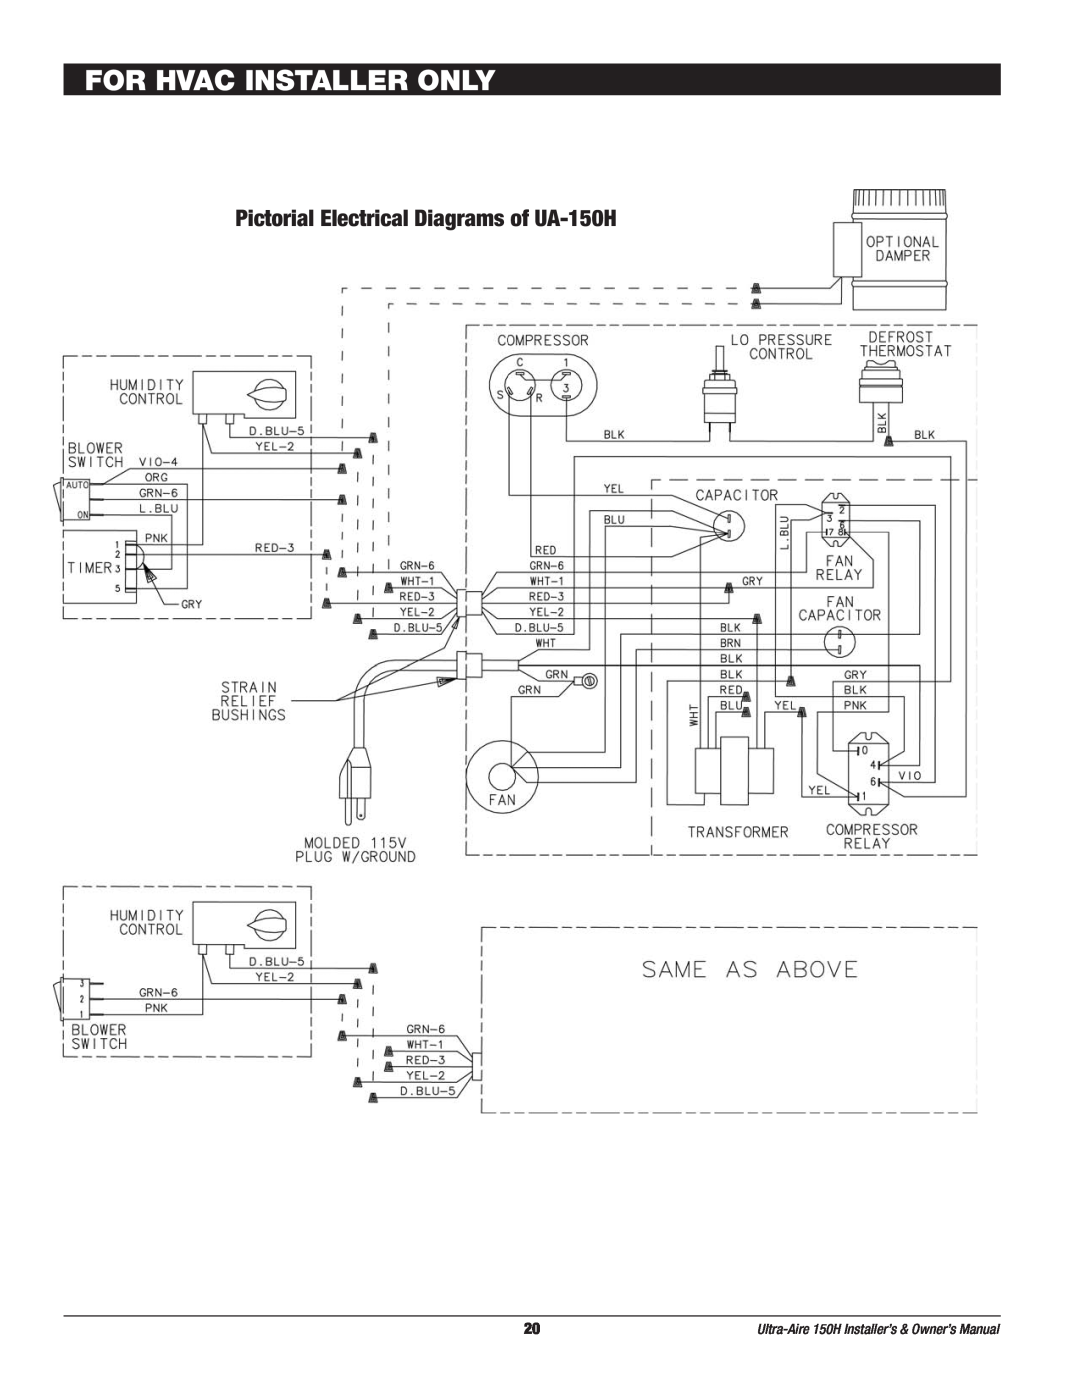 Therma-Stor Products Group owner manual For Hvac Installer Only, Pictorial Electrical Diagrams of UA-150H 